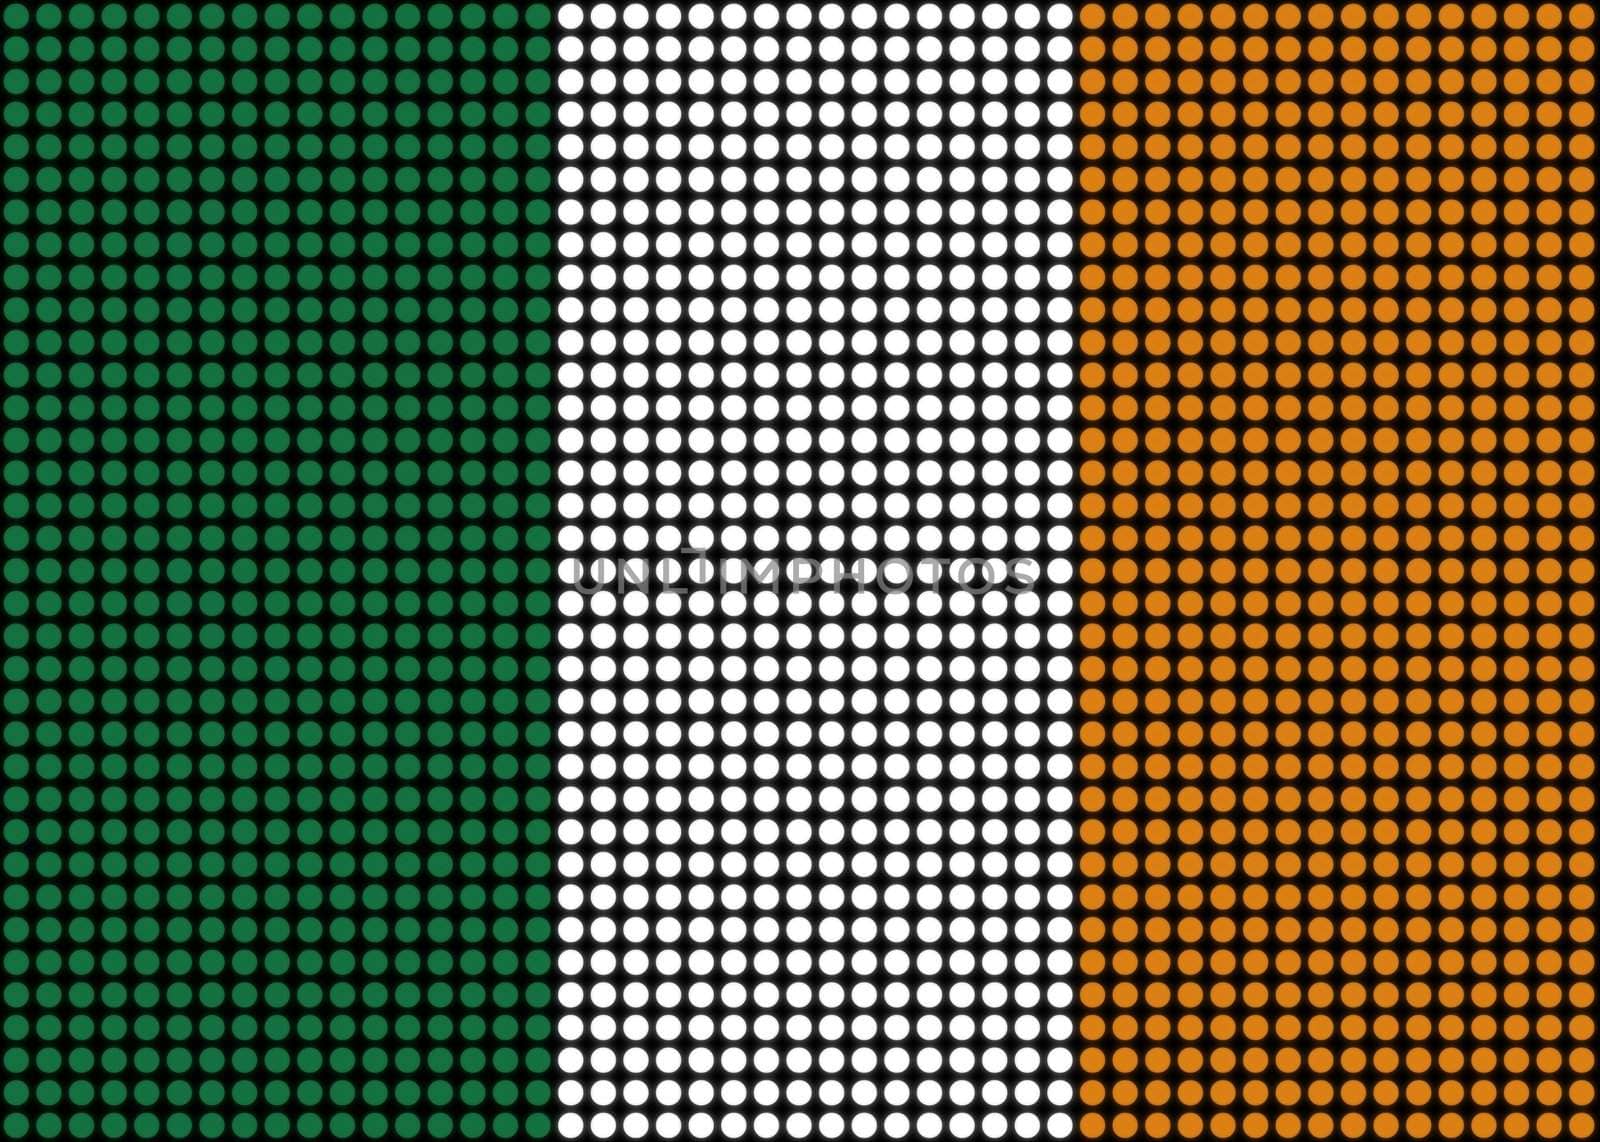 Abstract flag of Ireland made of dots